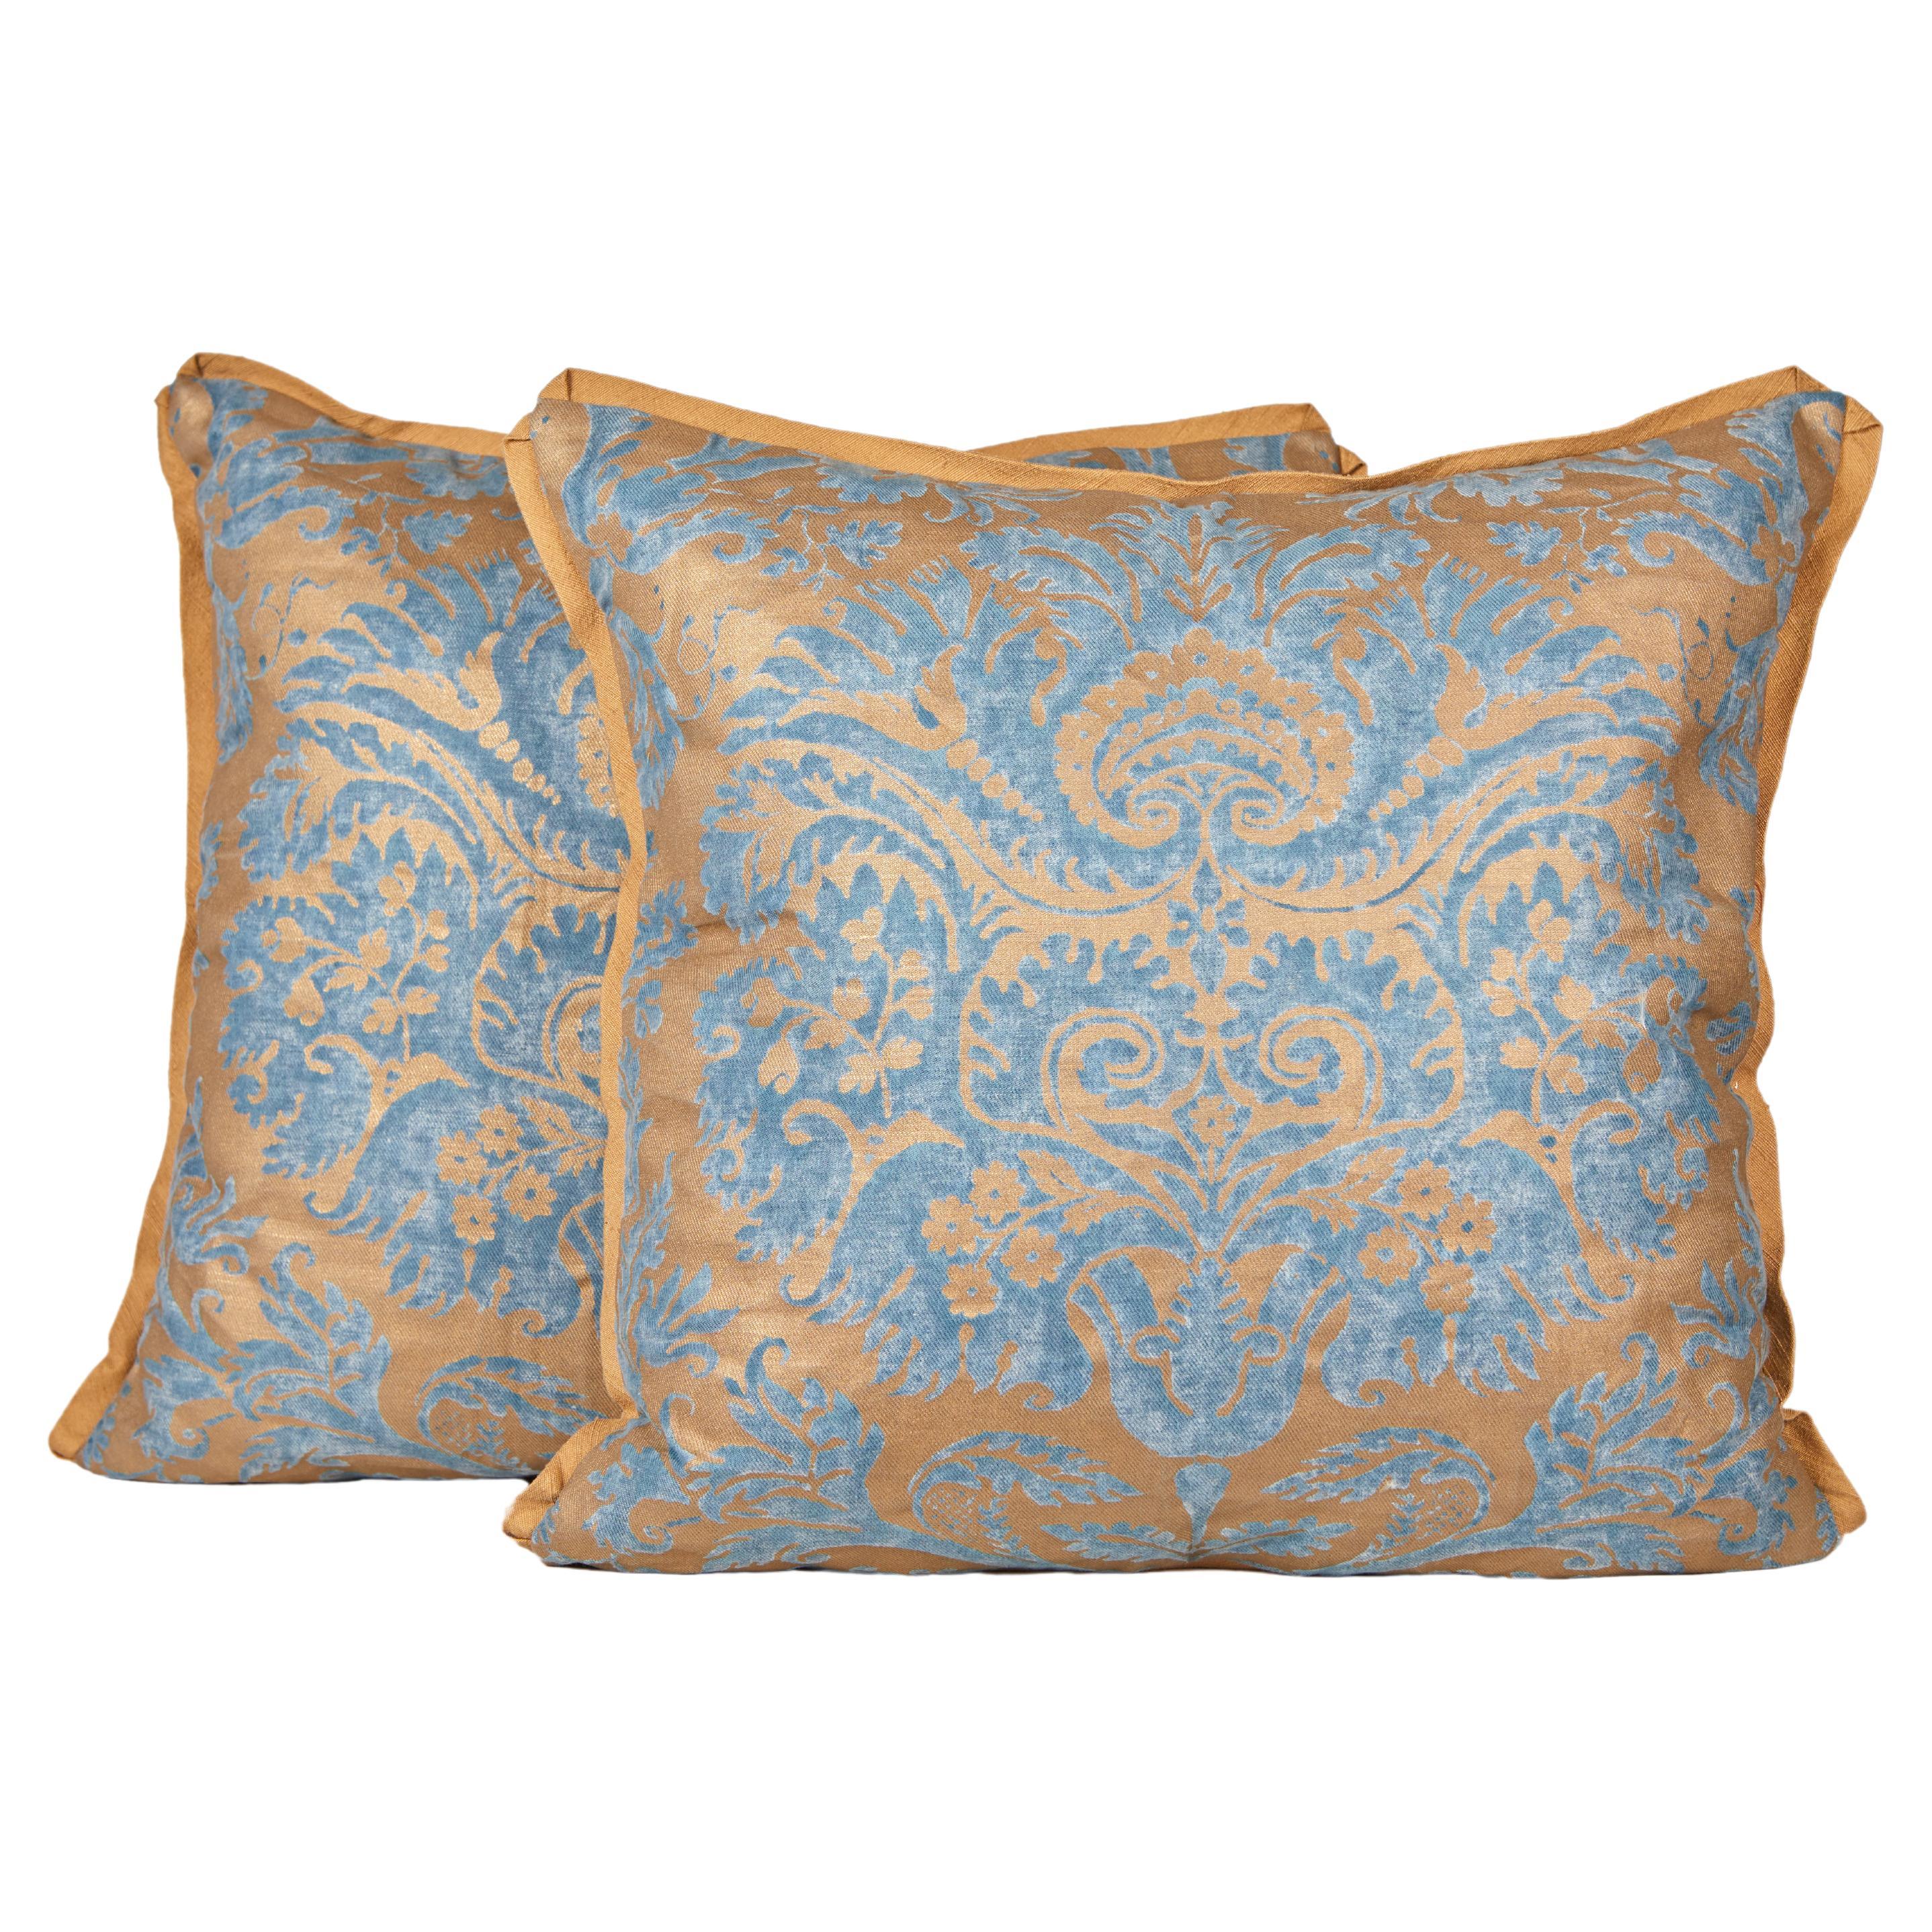 Pair of Fortuny Fabric Cushions in the Demedici Pattern, Blue and Silvery Gold